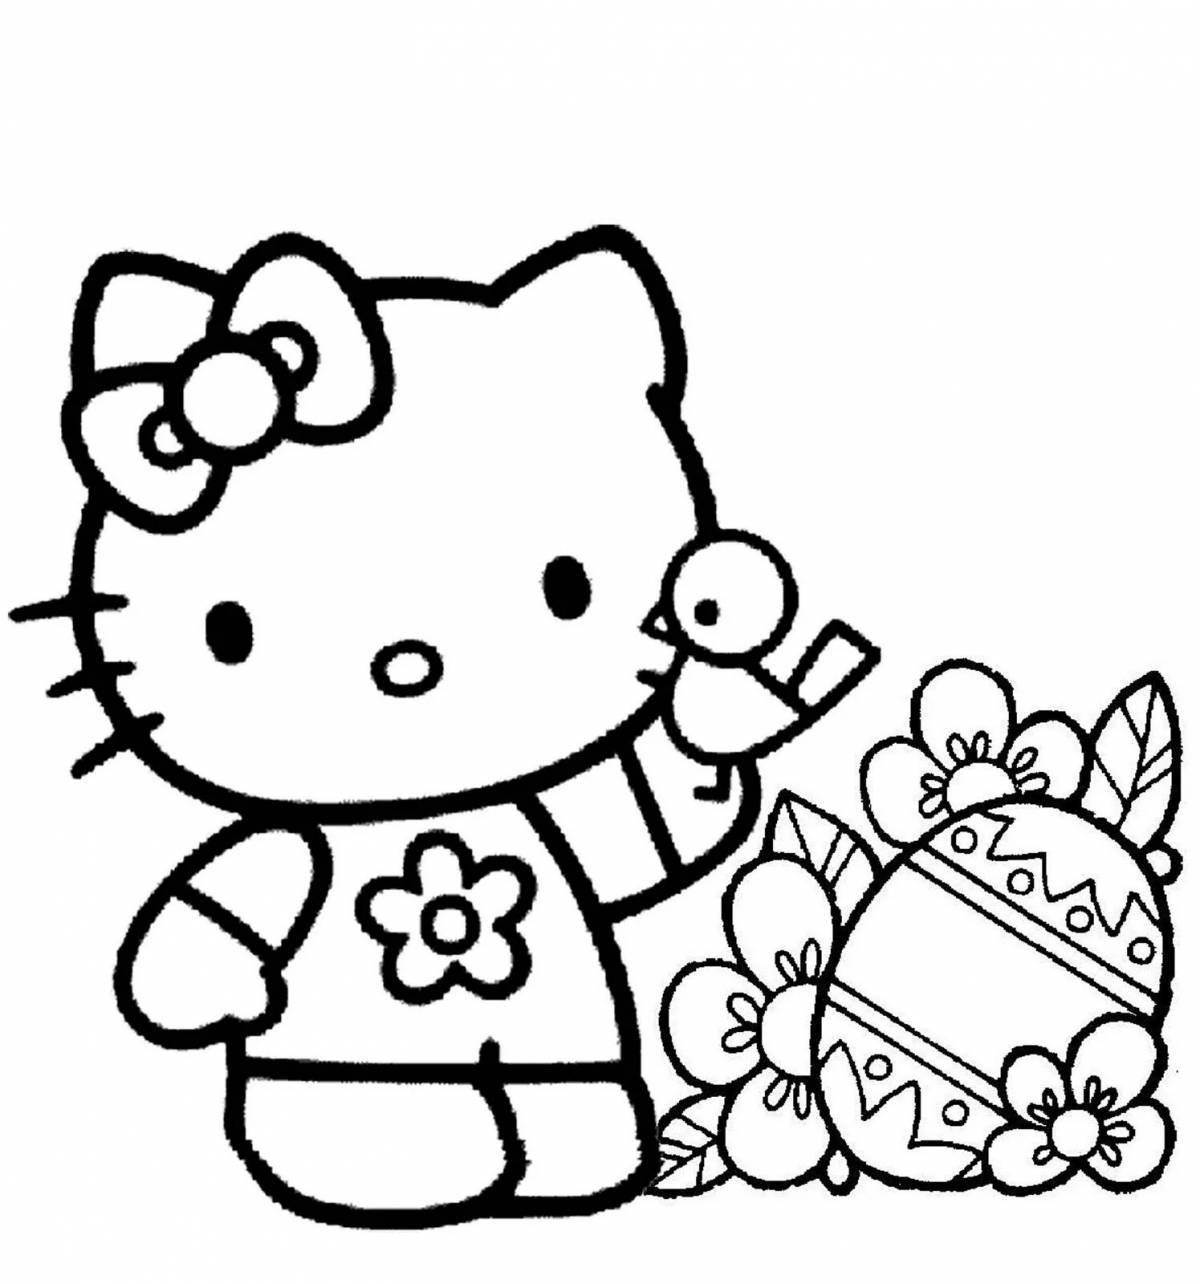 Cute astro kitty coloring page